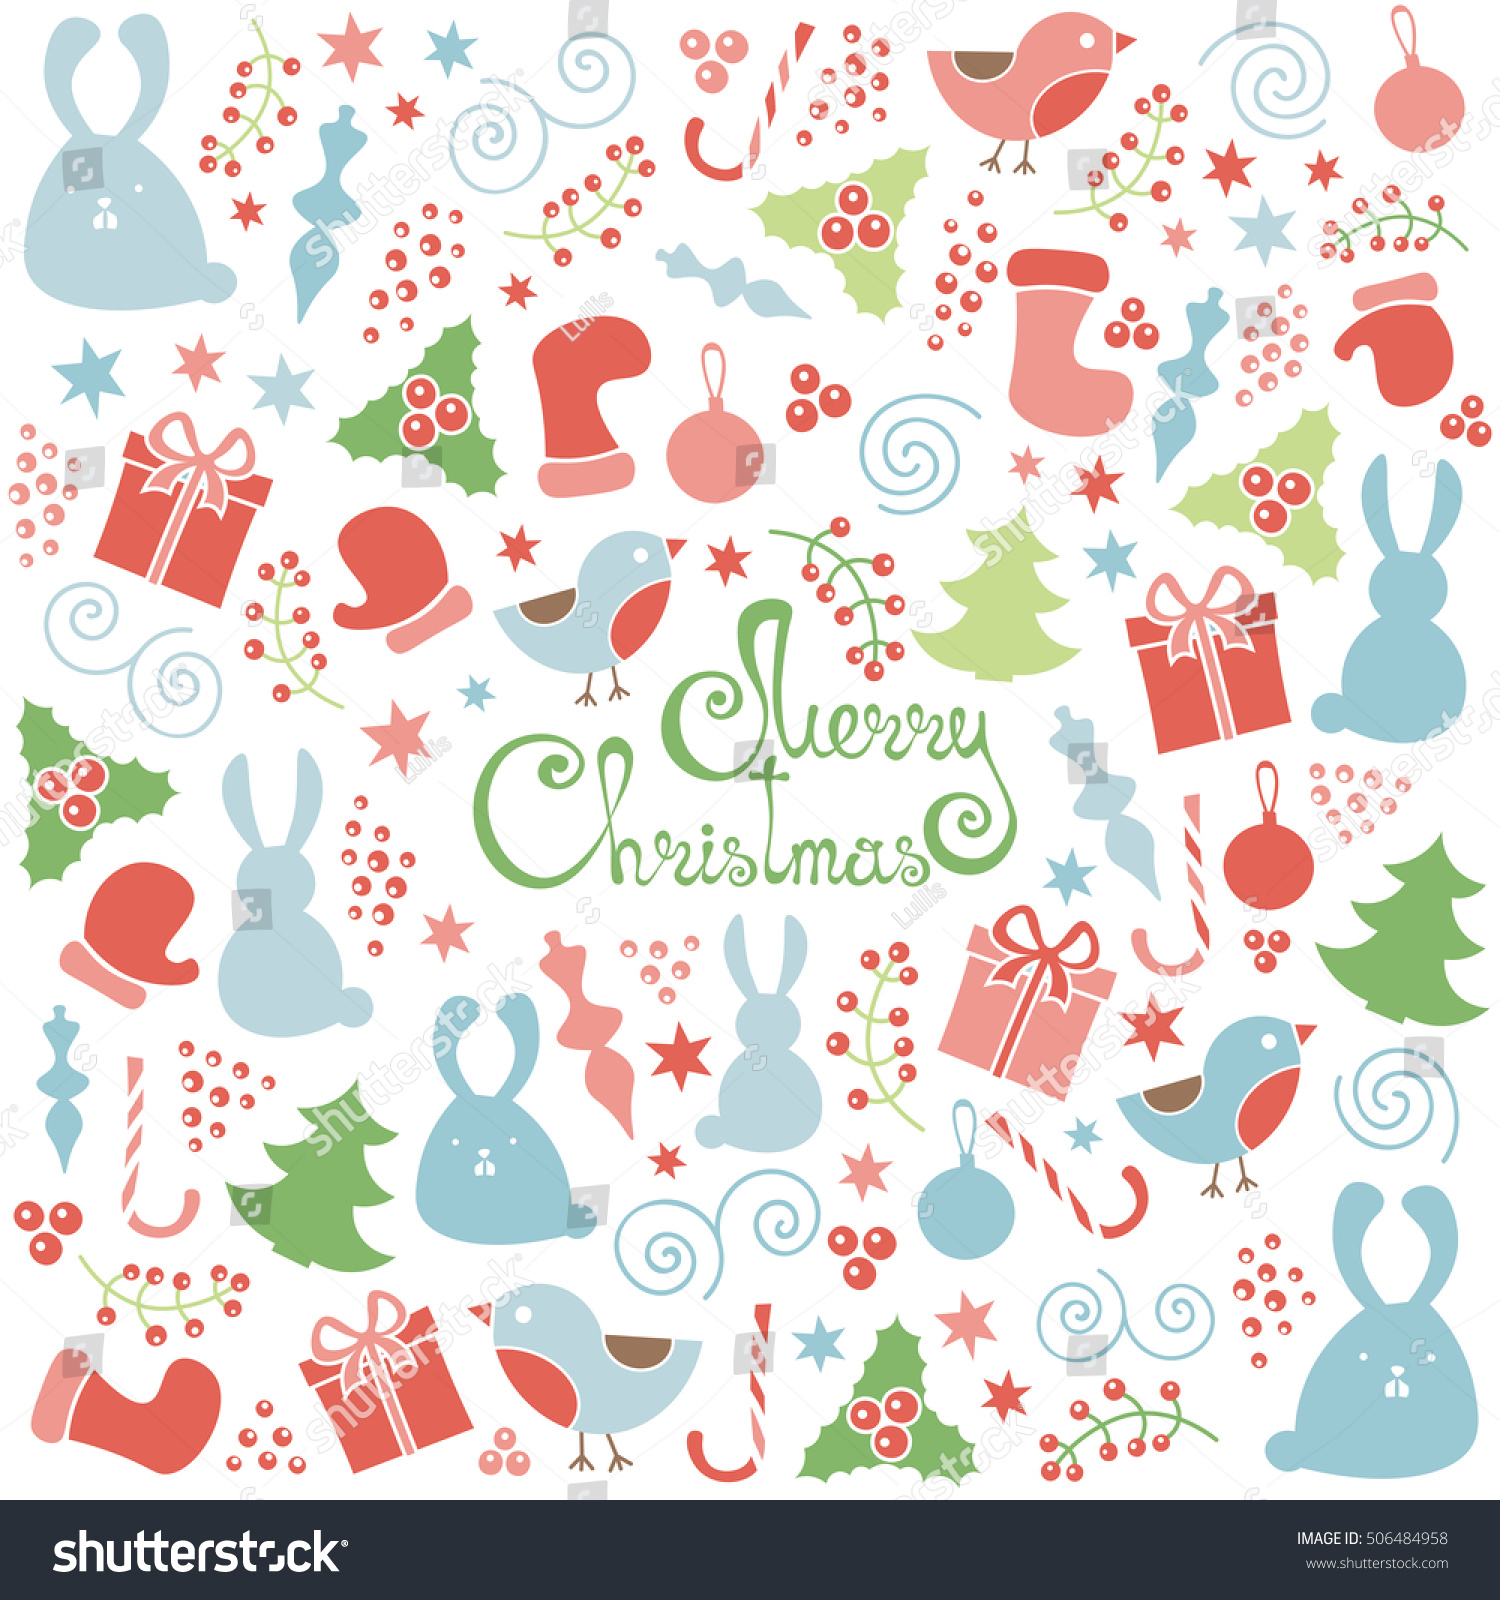 Christmas Doodle Design Elements Seamless Pattern Stock Vector (Royalty ...